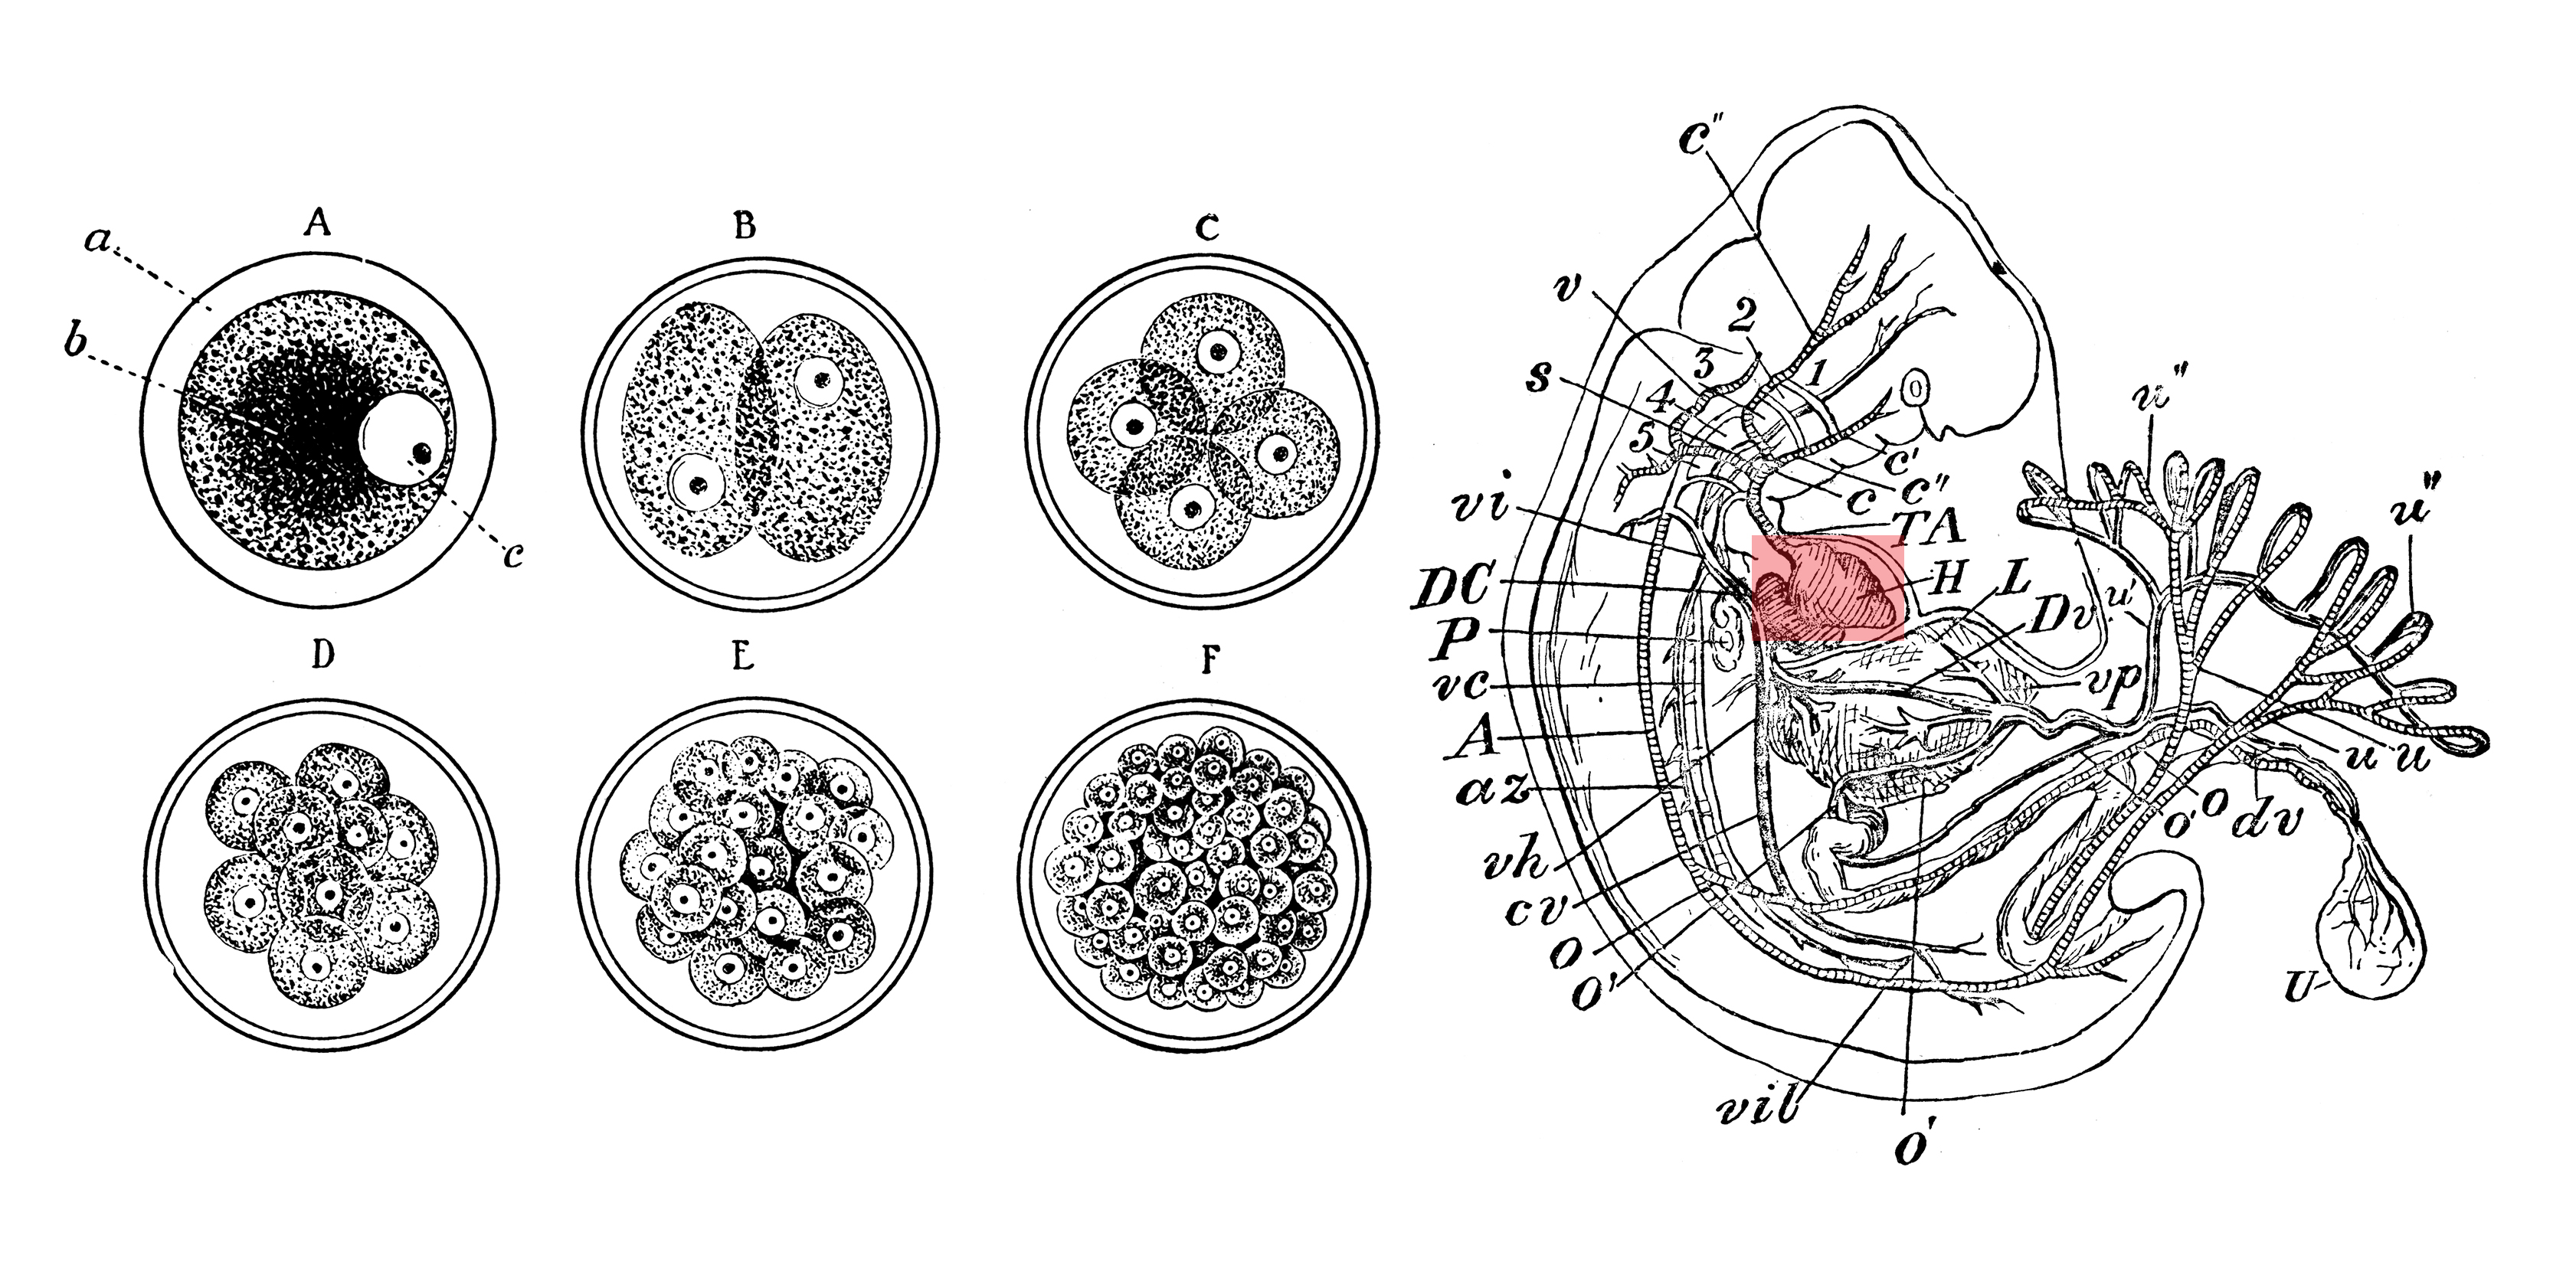 Illustration fo the heart development in the Human Embryo